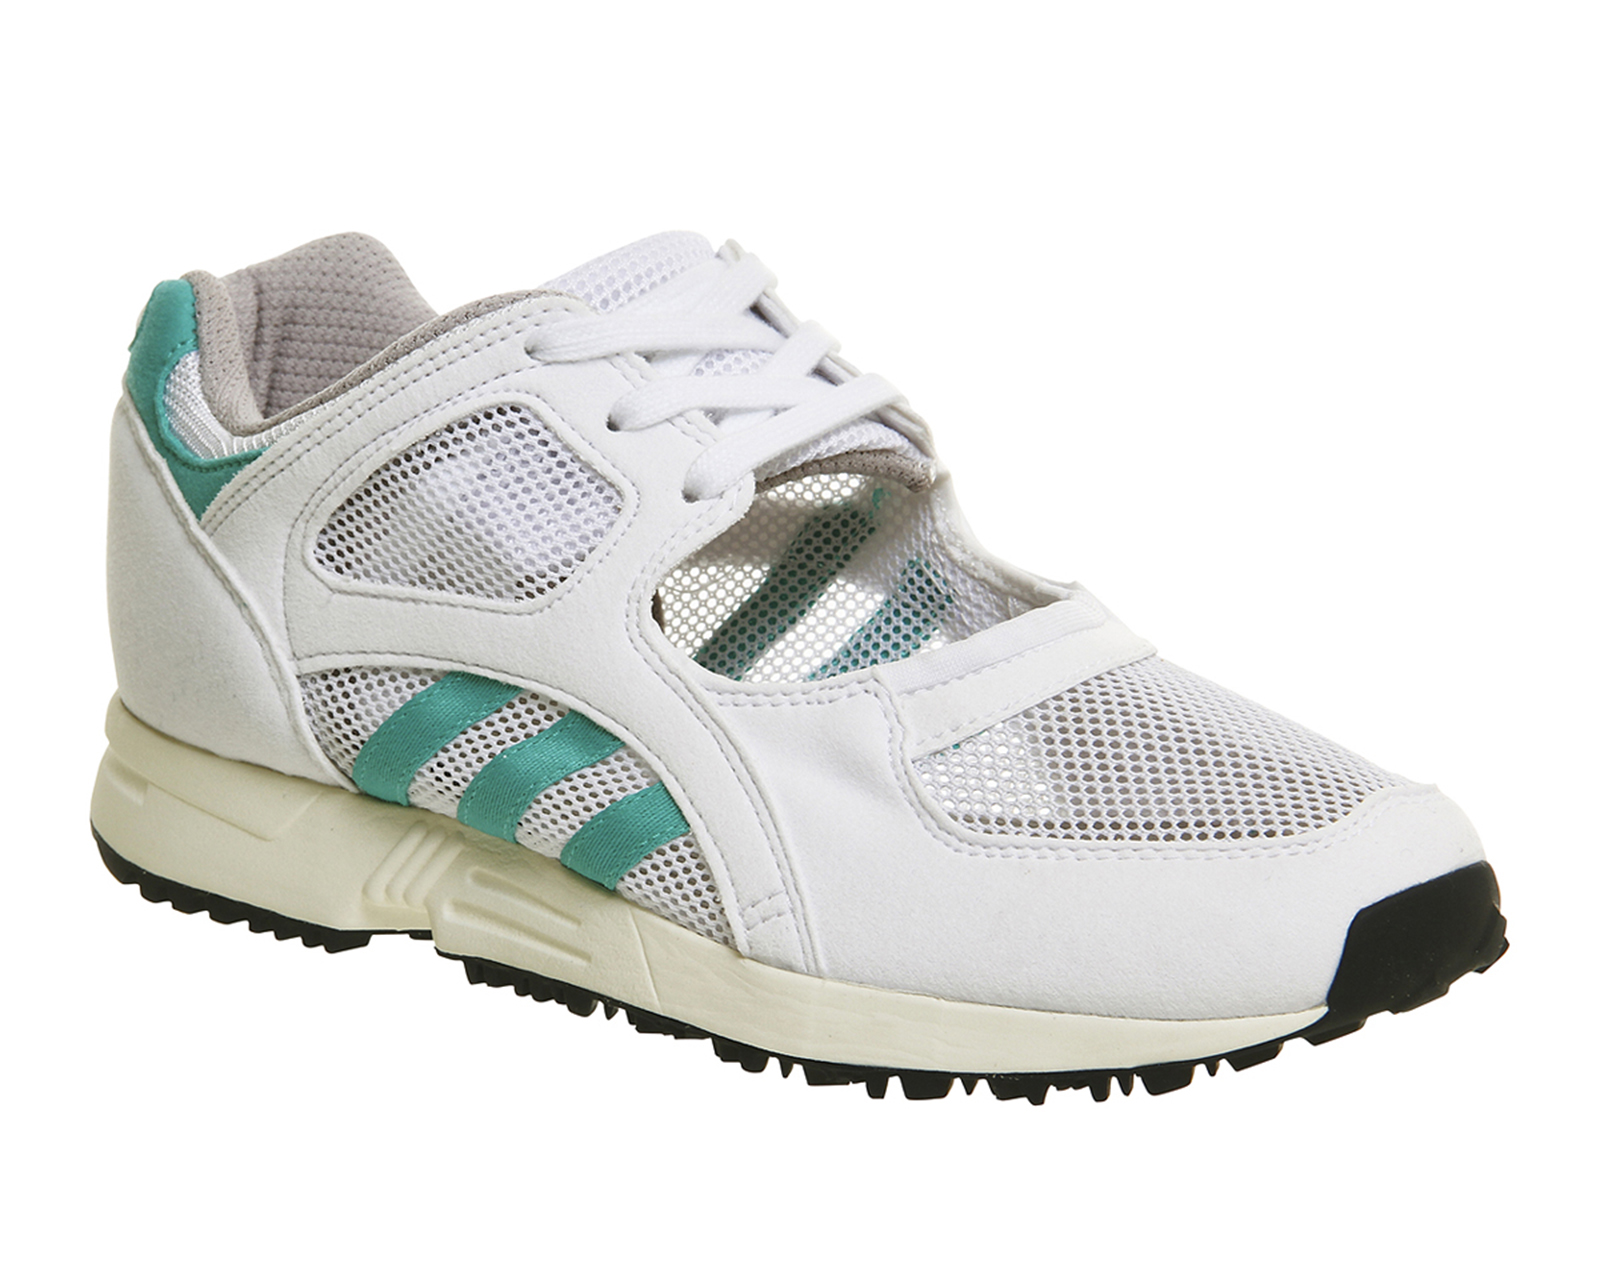 adidas racer eqt trainers